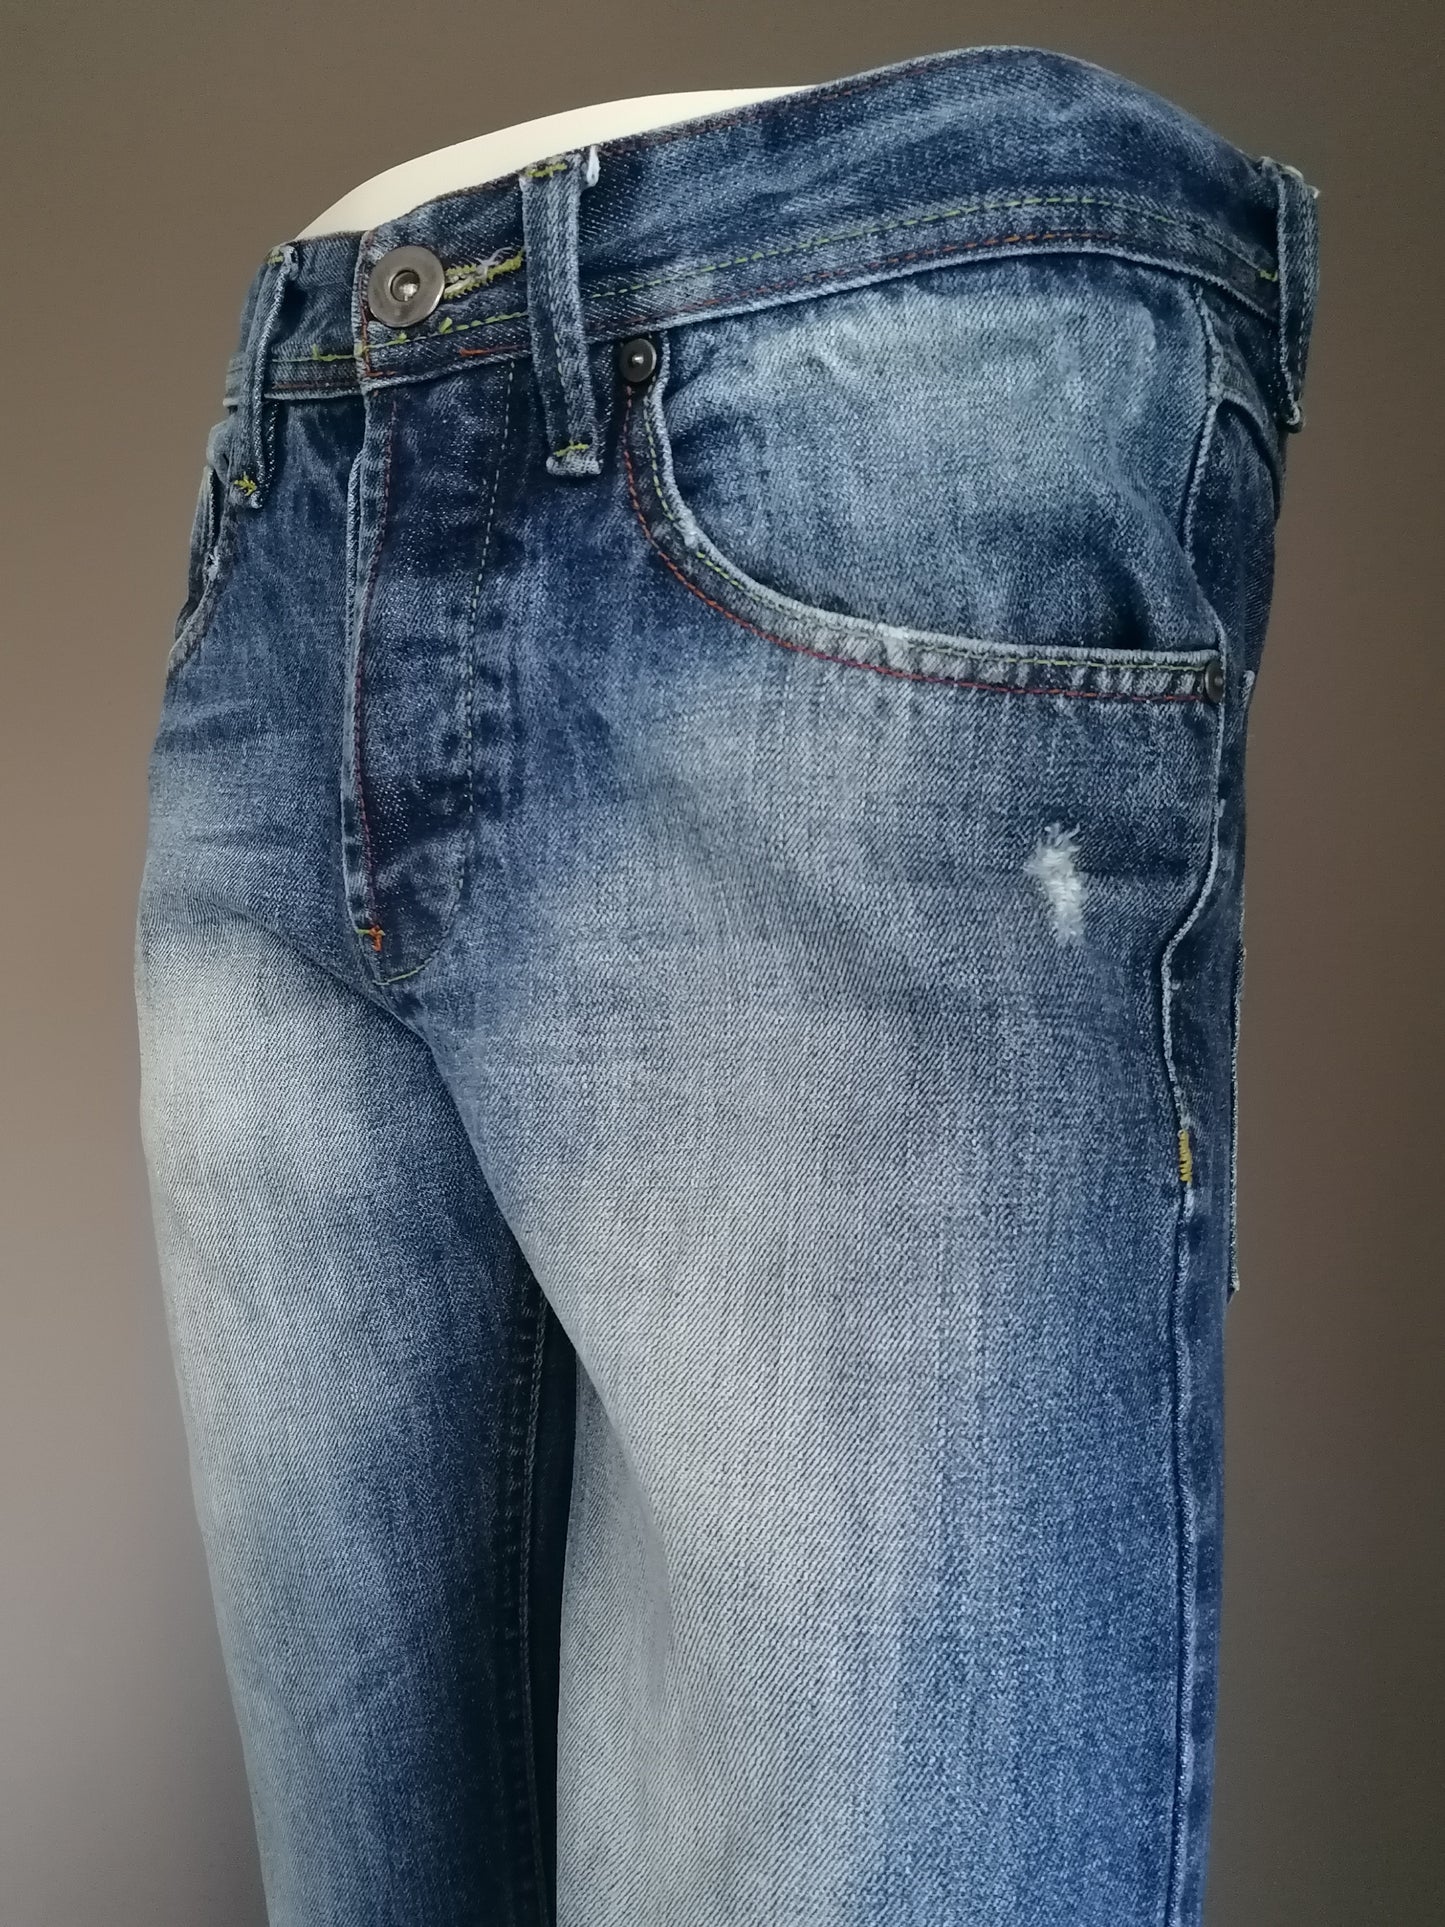 New look jeans. Blue colored. Size W30 - L30. Straight leg.